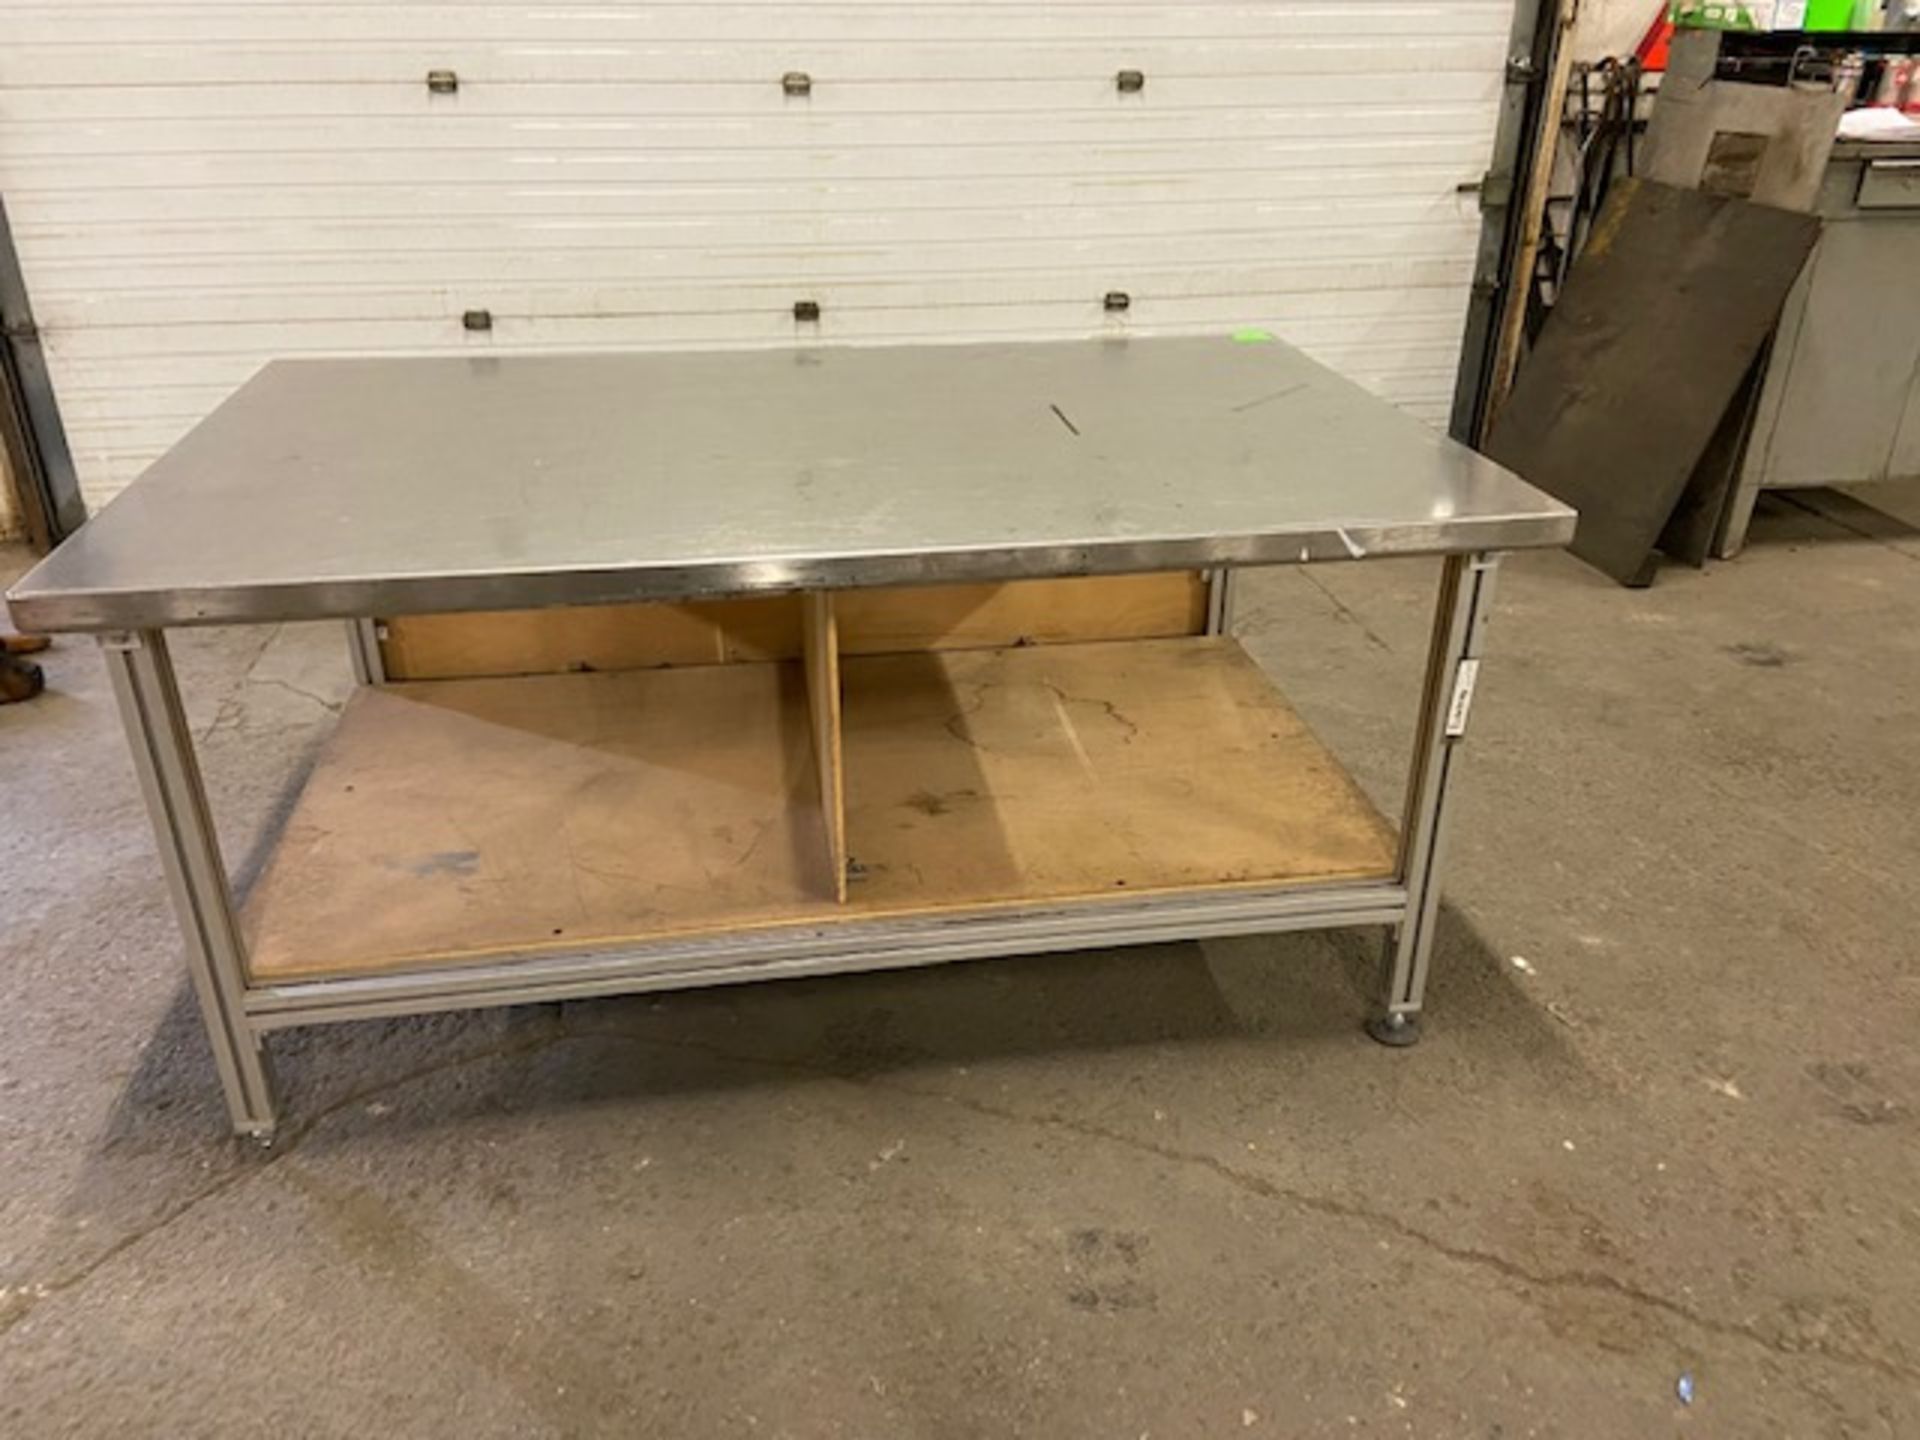 Work Table Work Bench Unit 72" x 44" with Stainless Steel Table Top